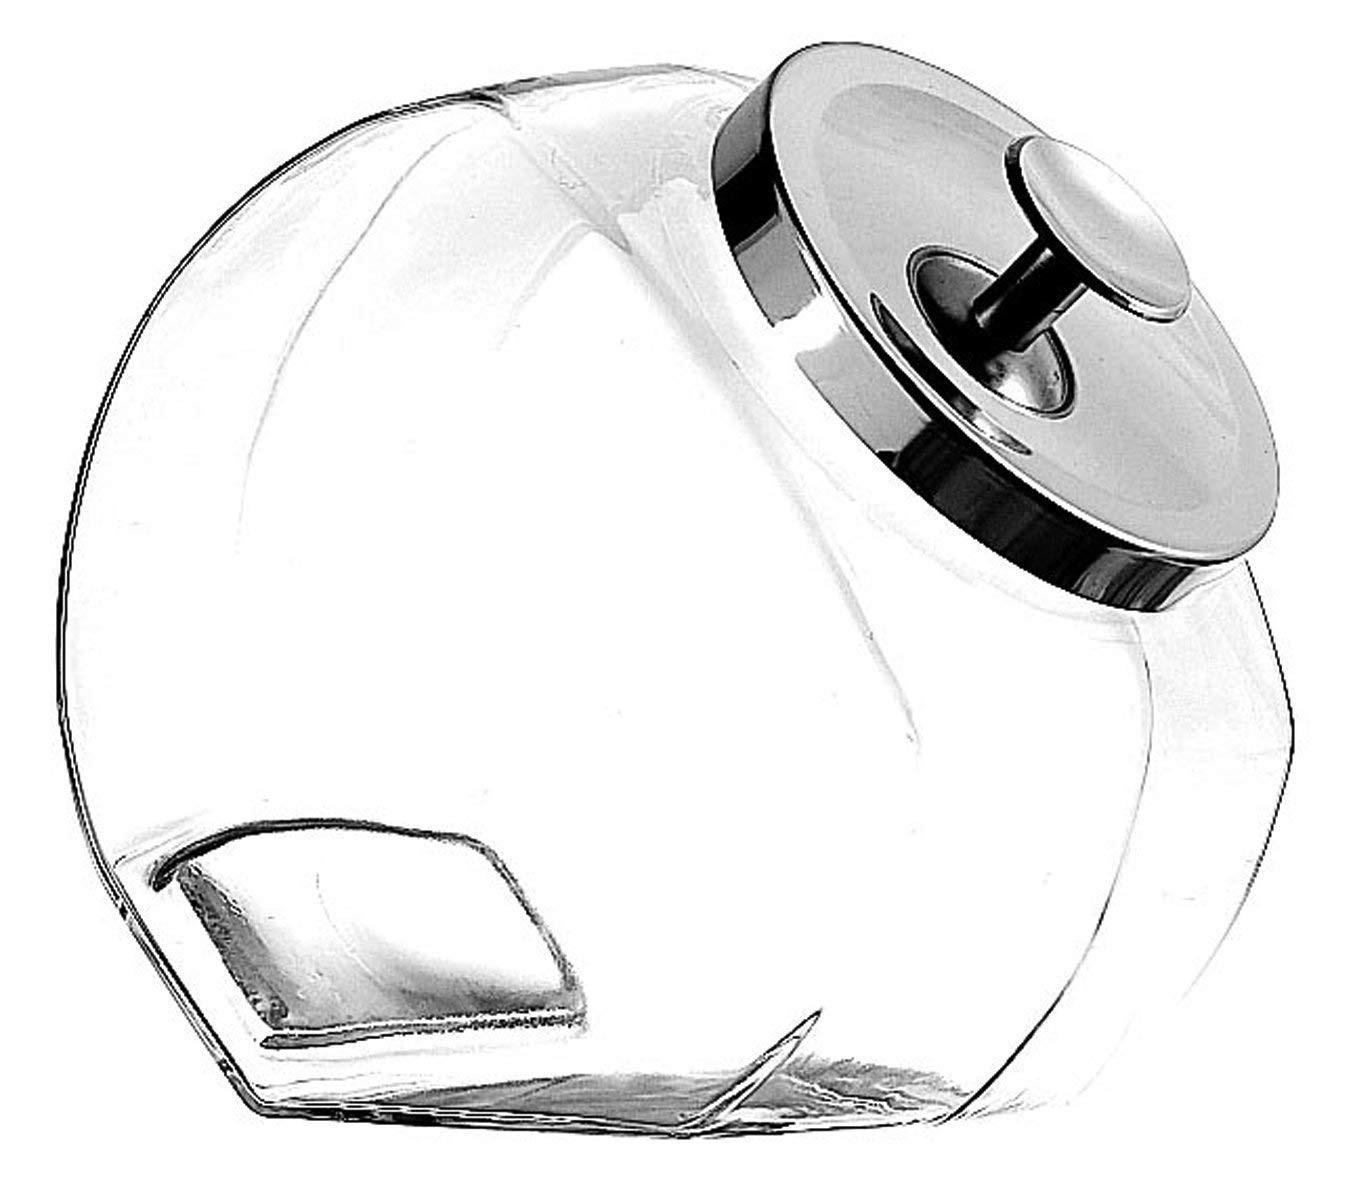 12 Amazing Discount Glass Vases wholesale Nz 2024 free download discount glass vases wholesale nz of amazon com anchor hocking 1 gallon penny candy jars with chrome lid in amazon com anchor hocking 1 gallon penny candy jars with chrome lid set of 4 food 